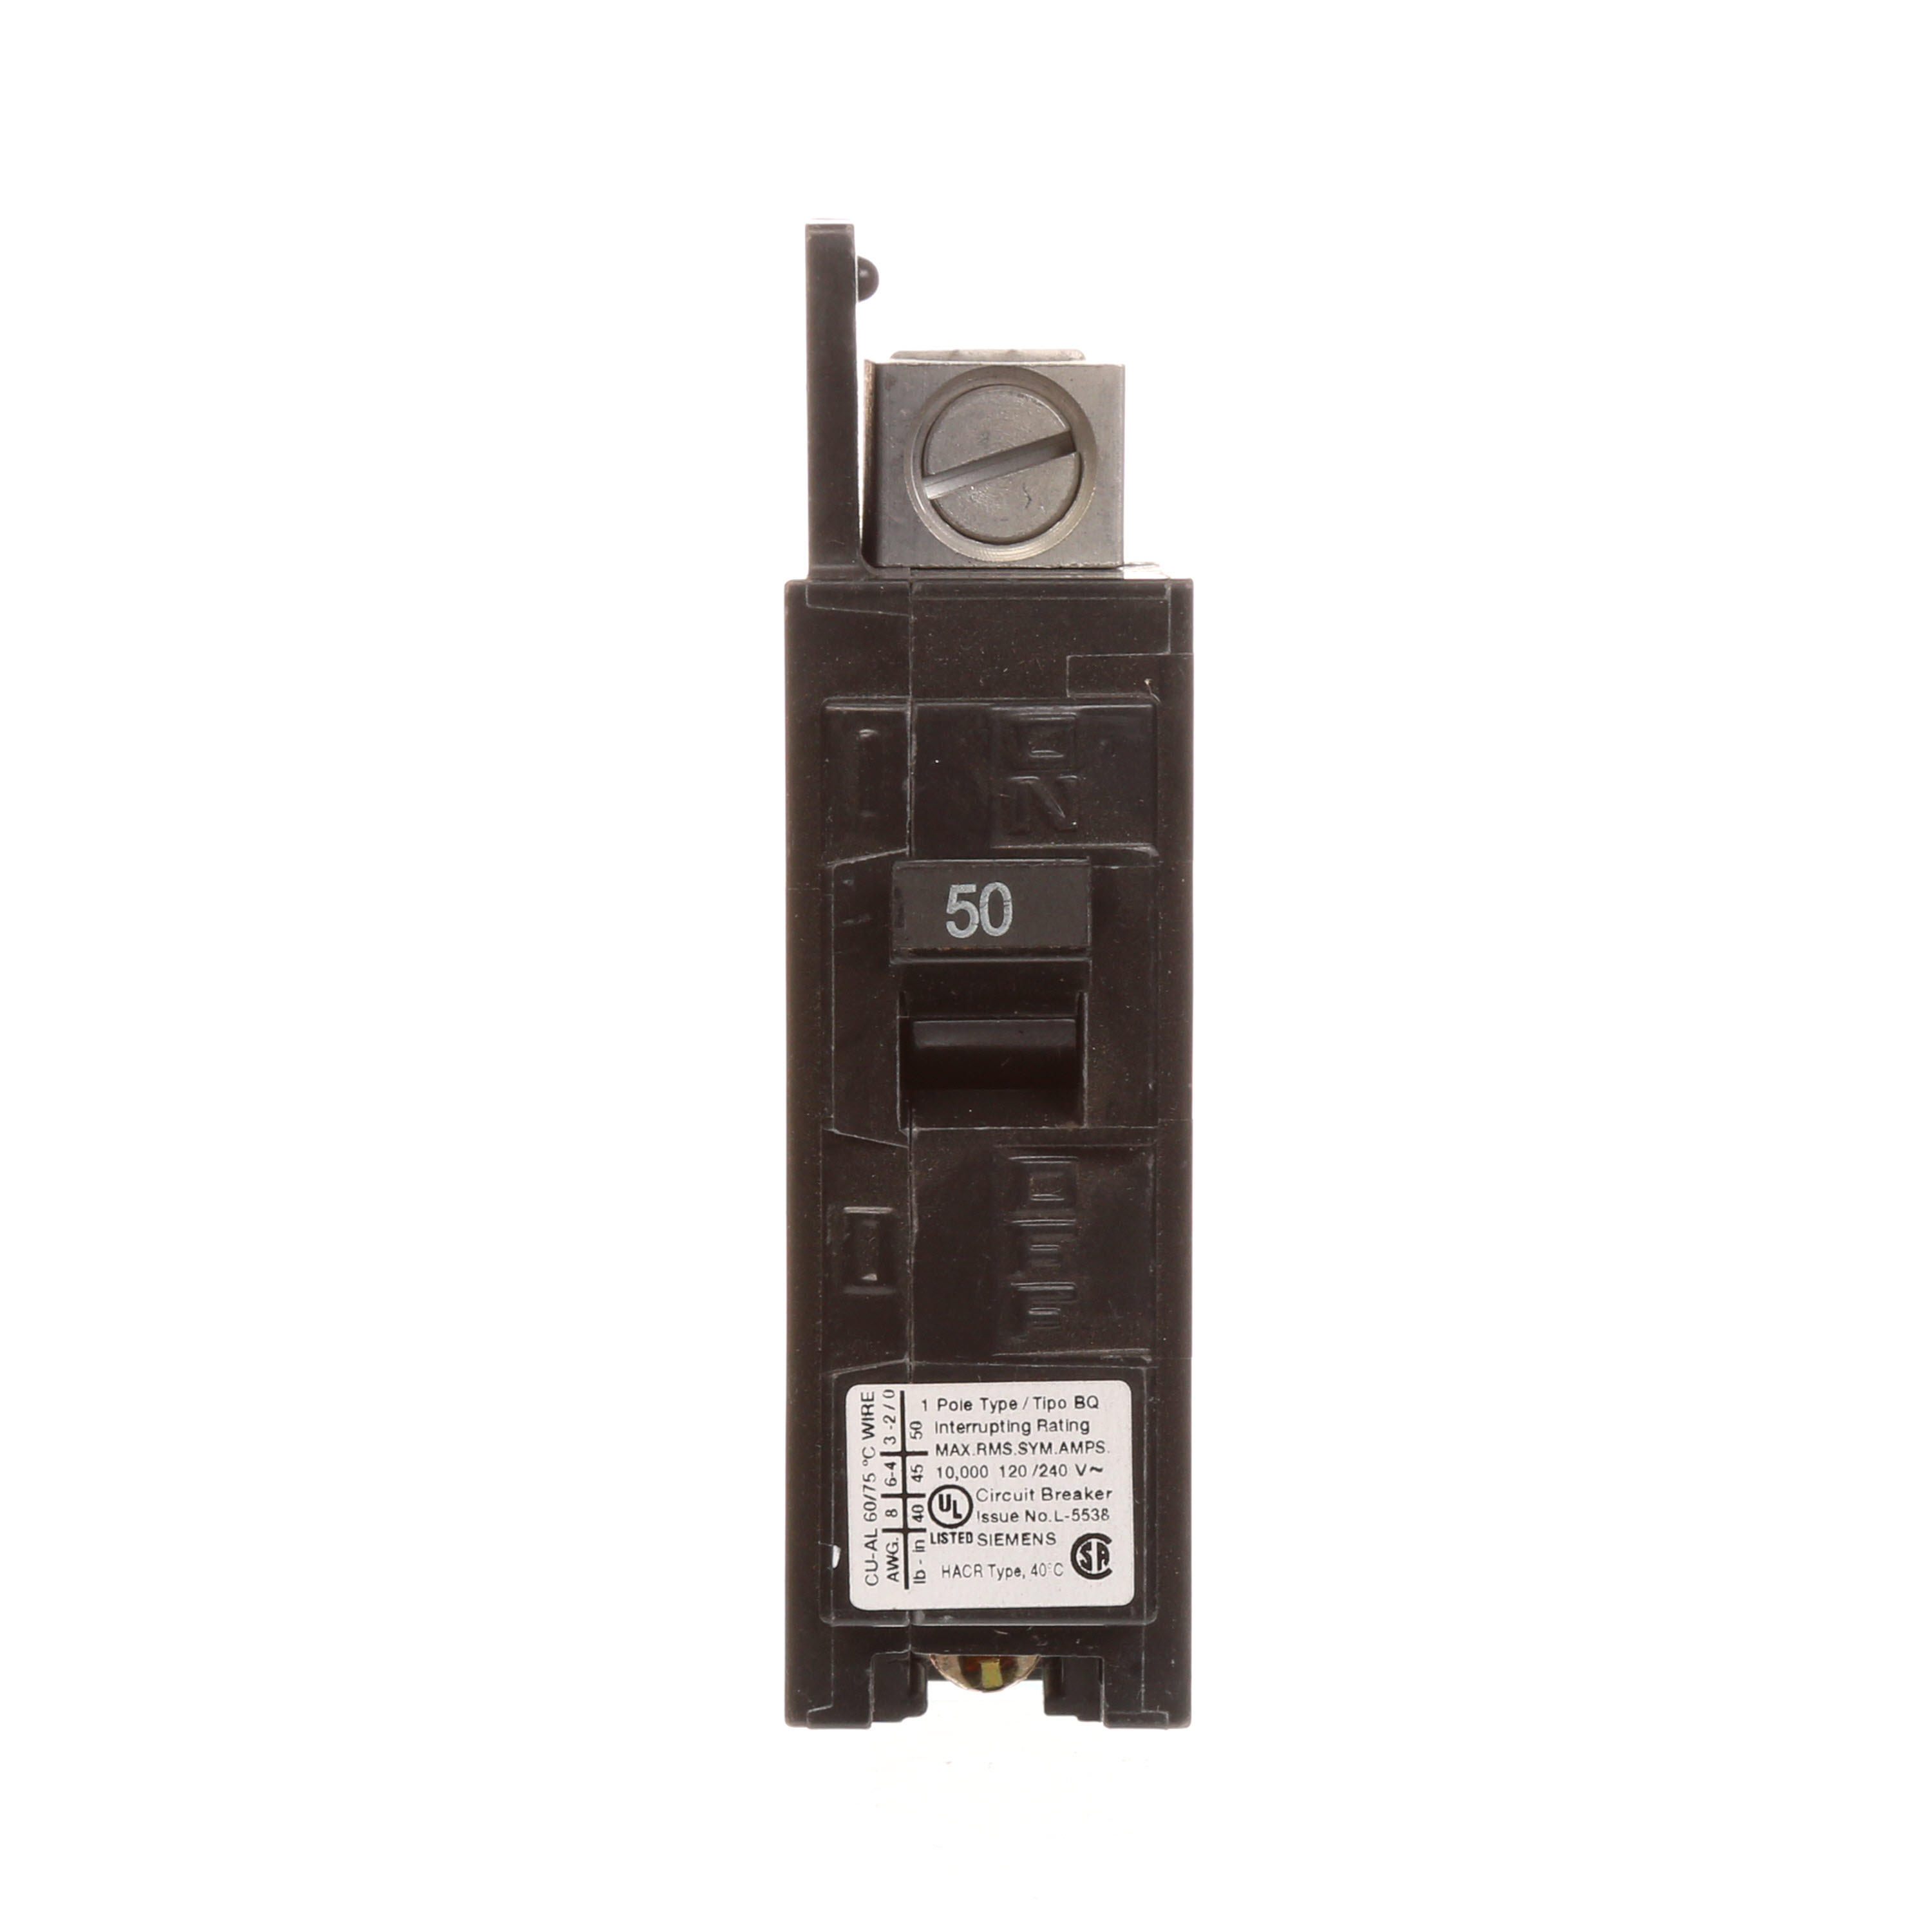 Siemens Low Voltage Molded Case Circuit Breakers General Purpose MCCBs are Circuit Protection Molded Case Circuit Breakers. 1-Pole circuit breaker type BQ. Rated 120V (050A) (AIR 10 kA). Special features line side lugs included. Note Load side lugs are included.